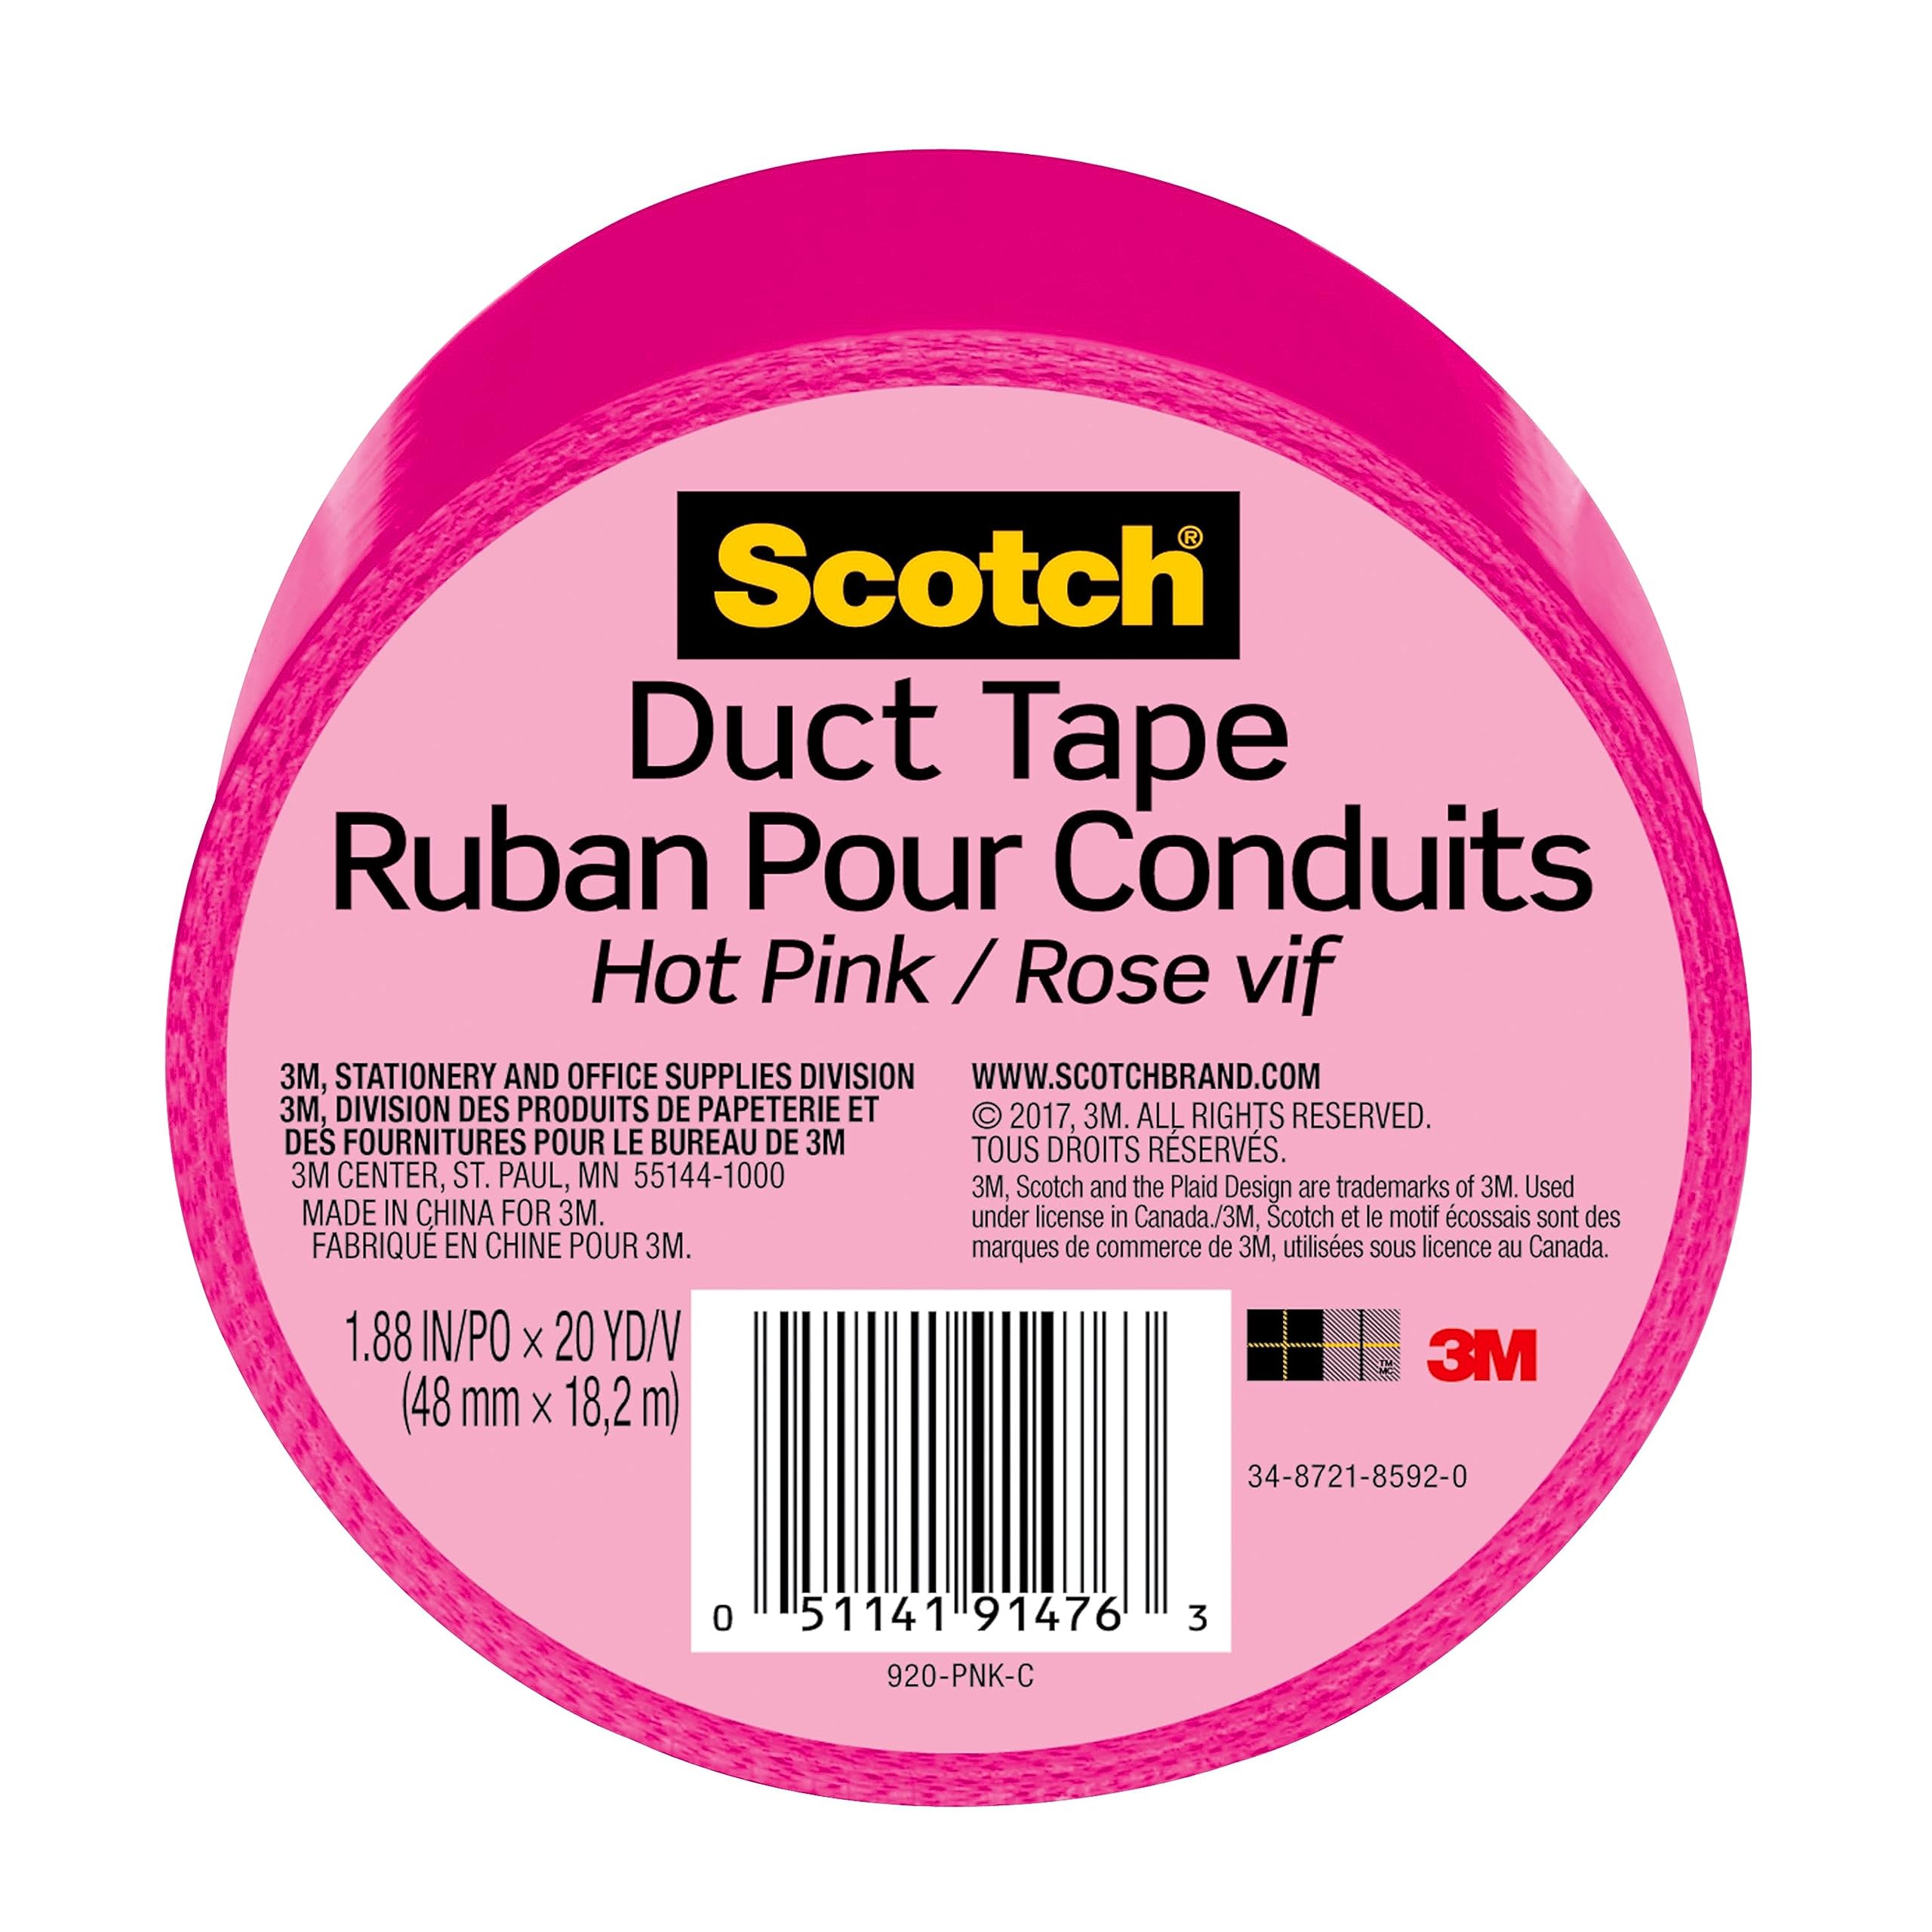 Scotch Duct Tape, 1.88 in x 20 yd, Hot Pink, 6 Pack $7.99 w/ Amazon Free Prime Shipping or Subscribe & Save